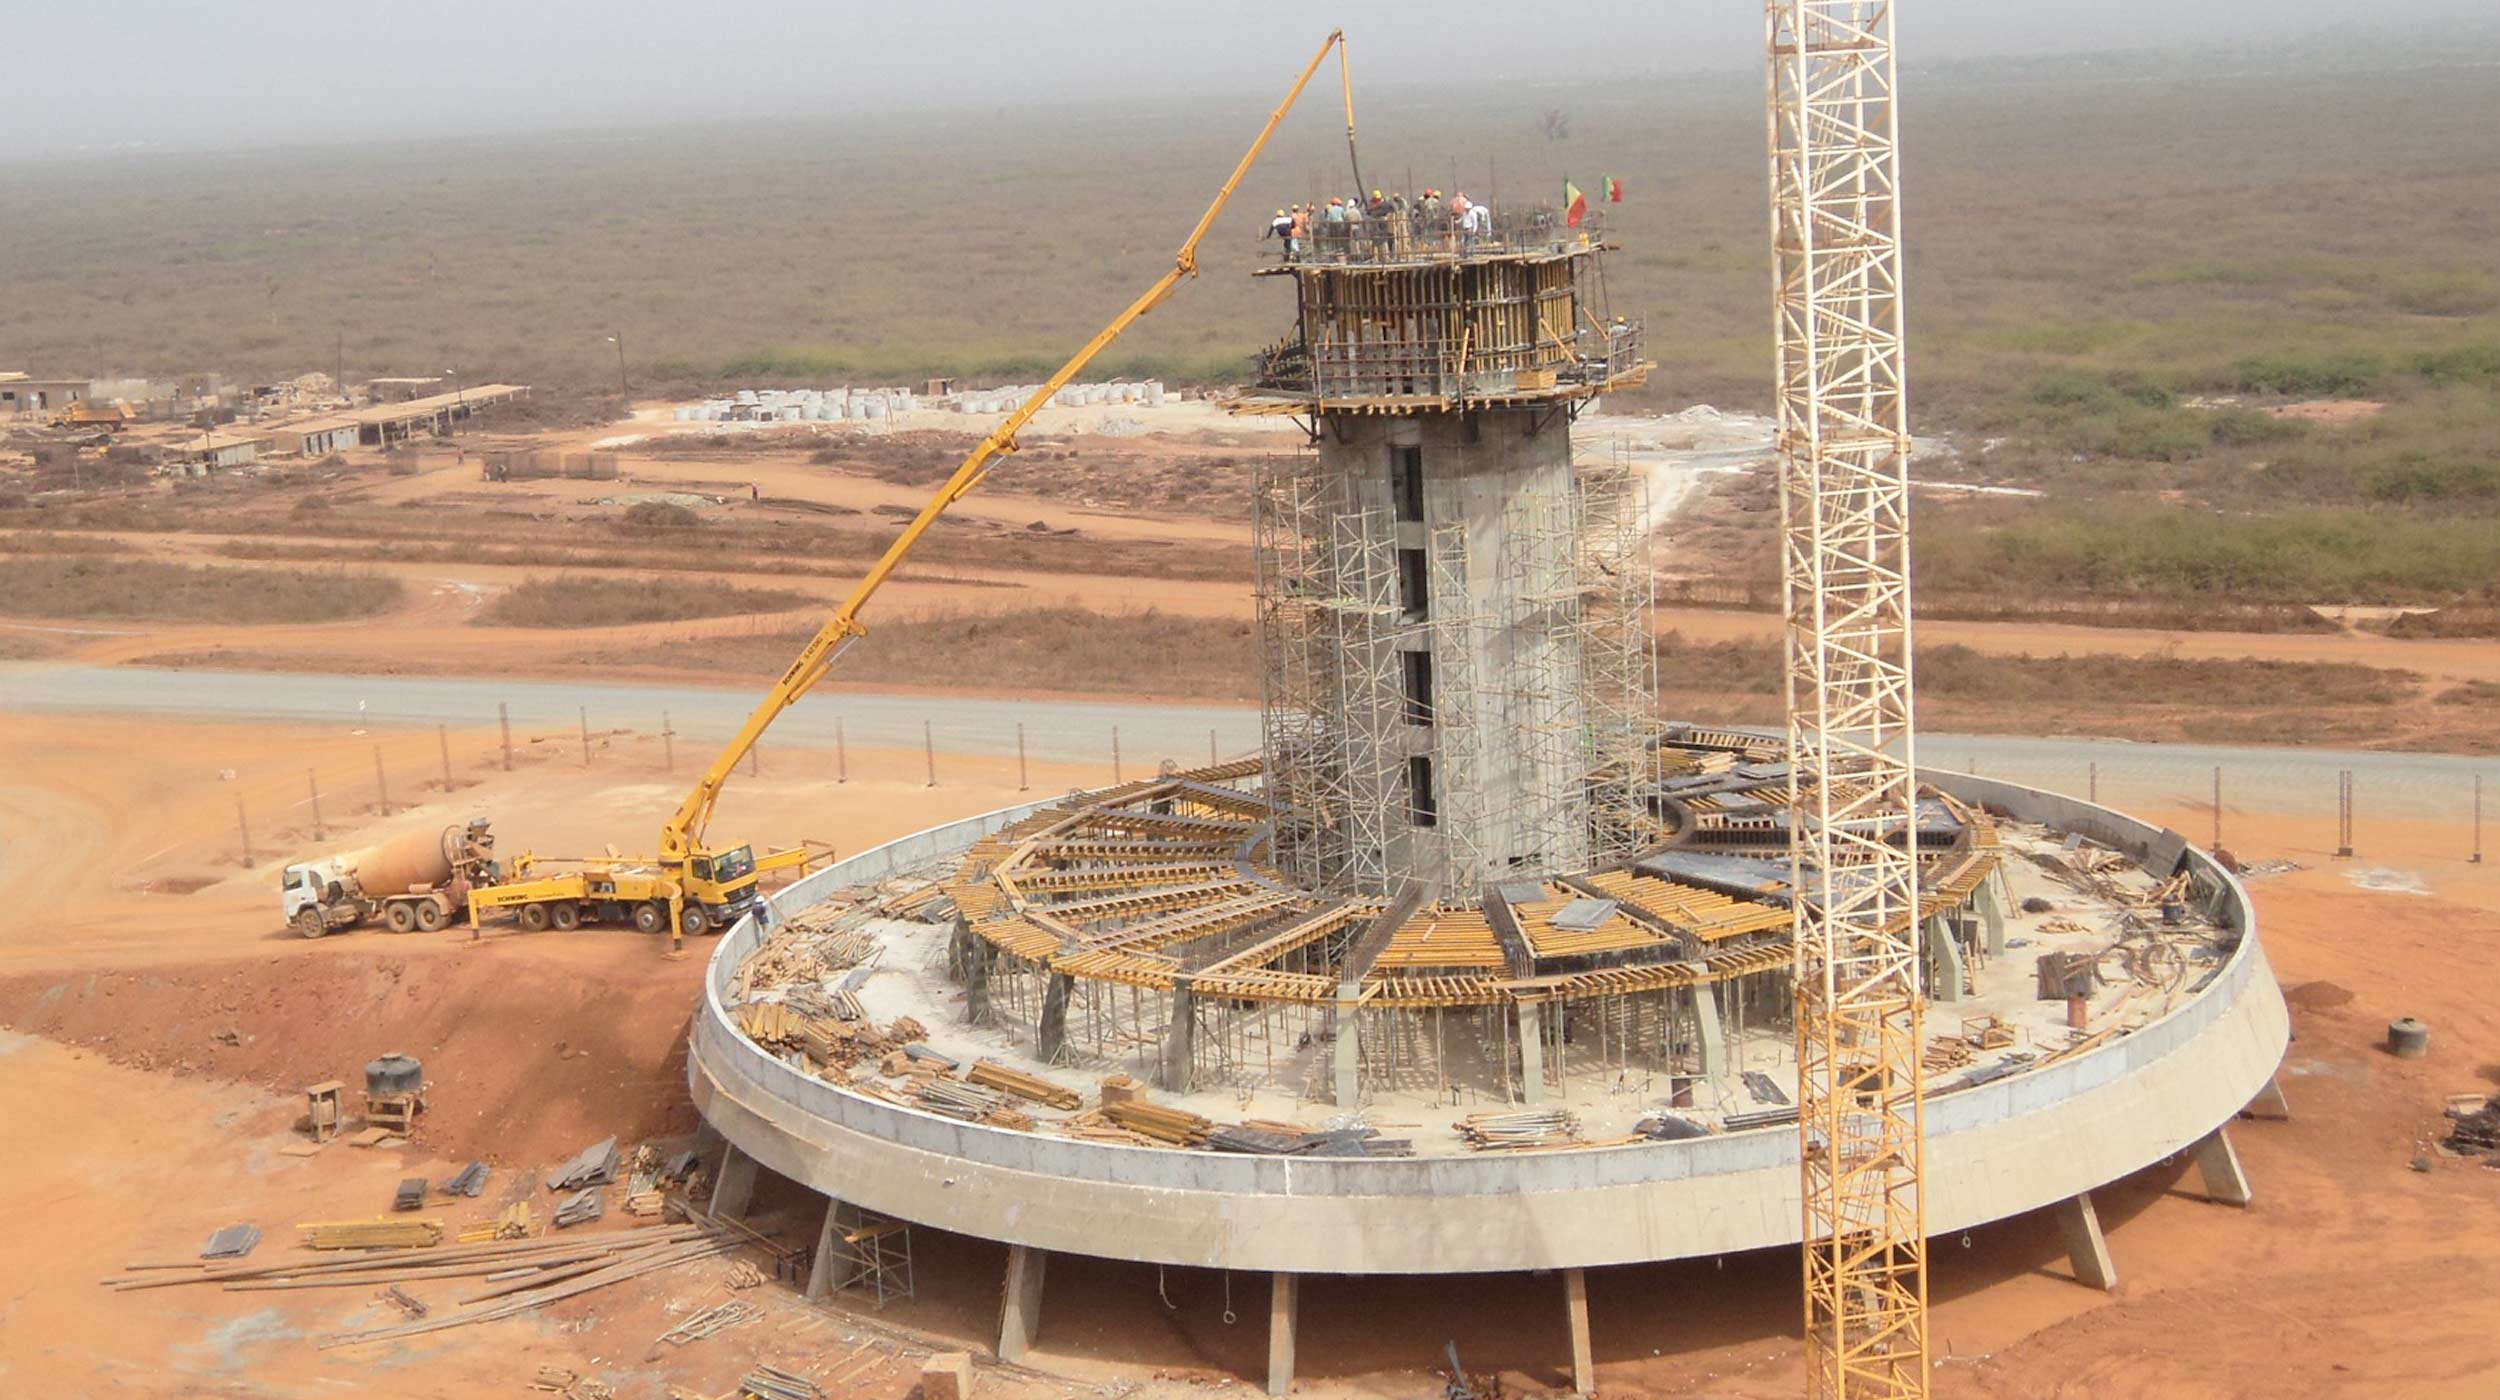 Also present in this part of the world, ULMA undertook the construction of the 49.74 m high control tower at the Dakar International Airport.